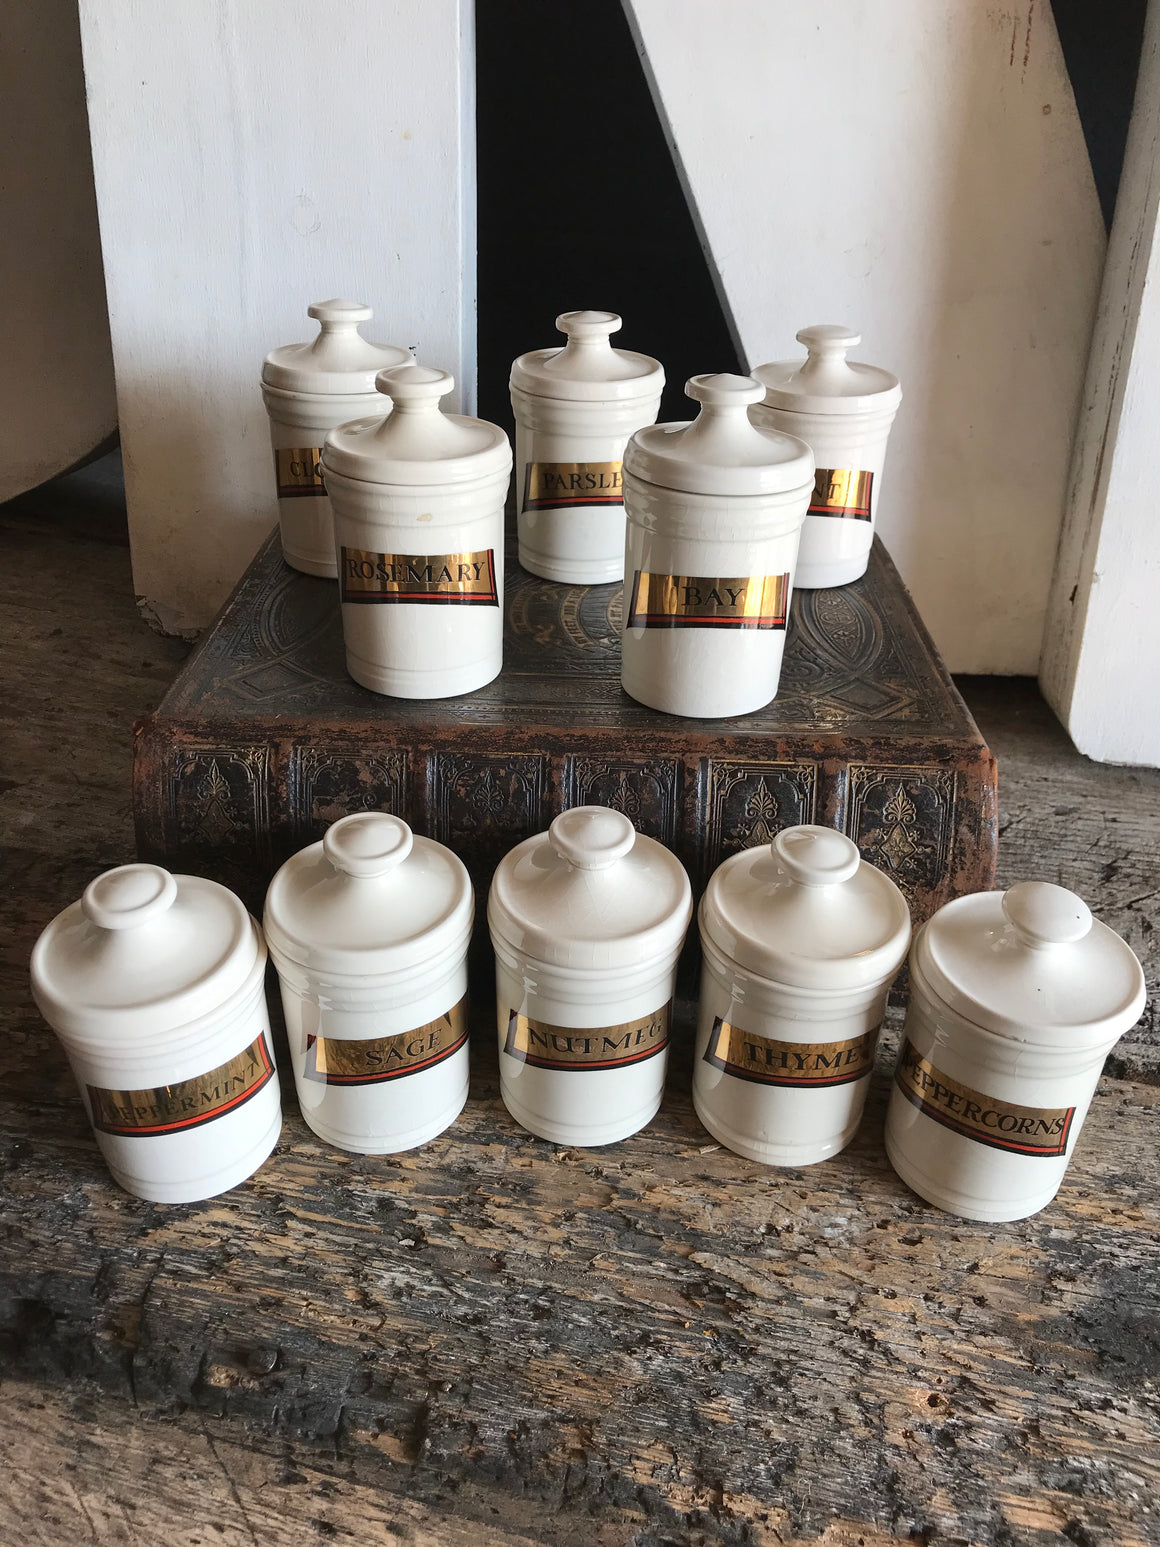 A collection of porcelain apothecary spice jars